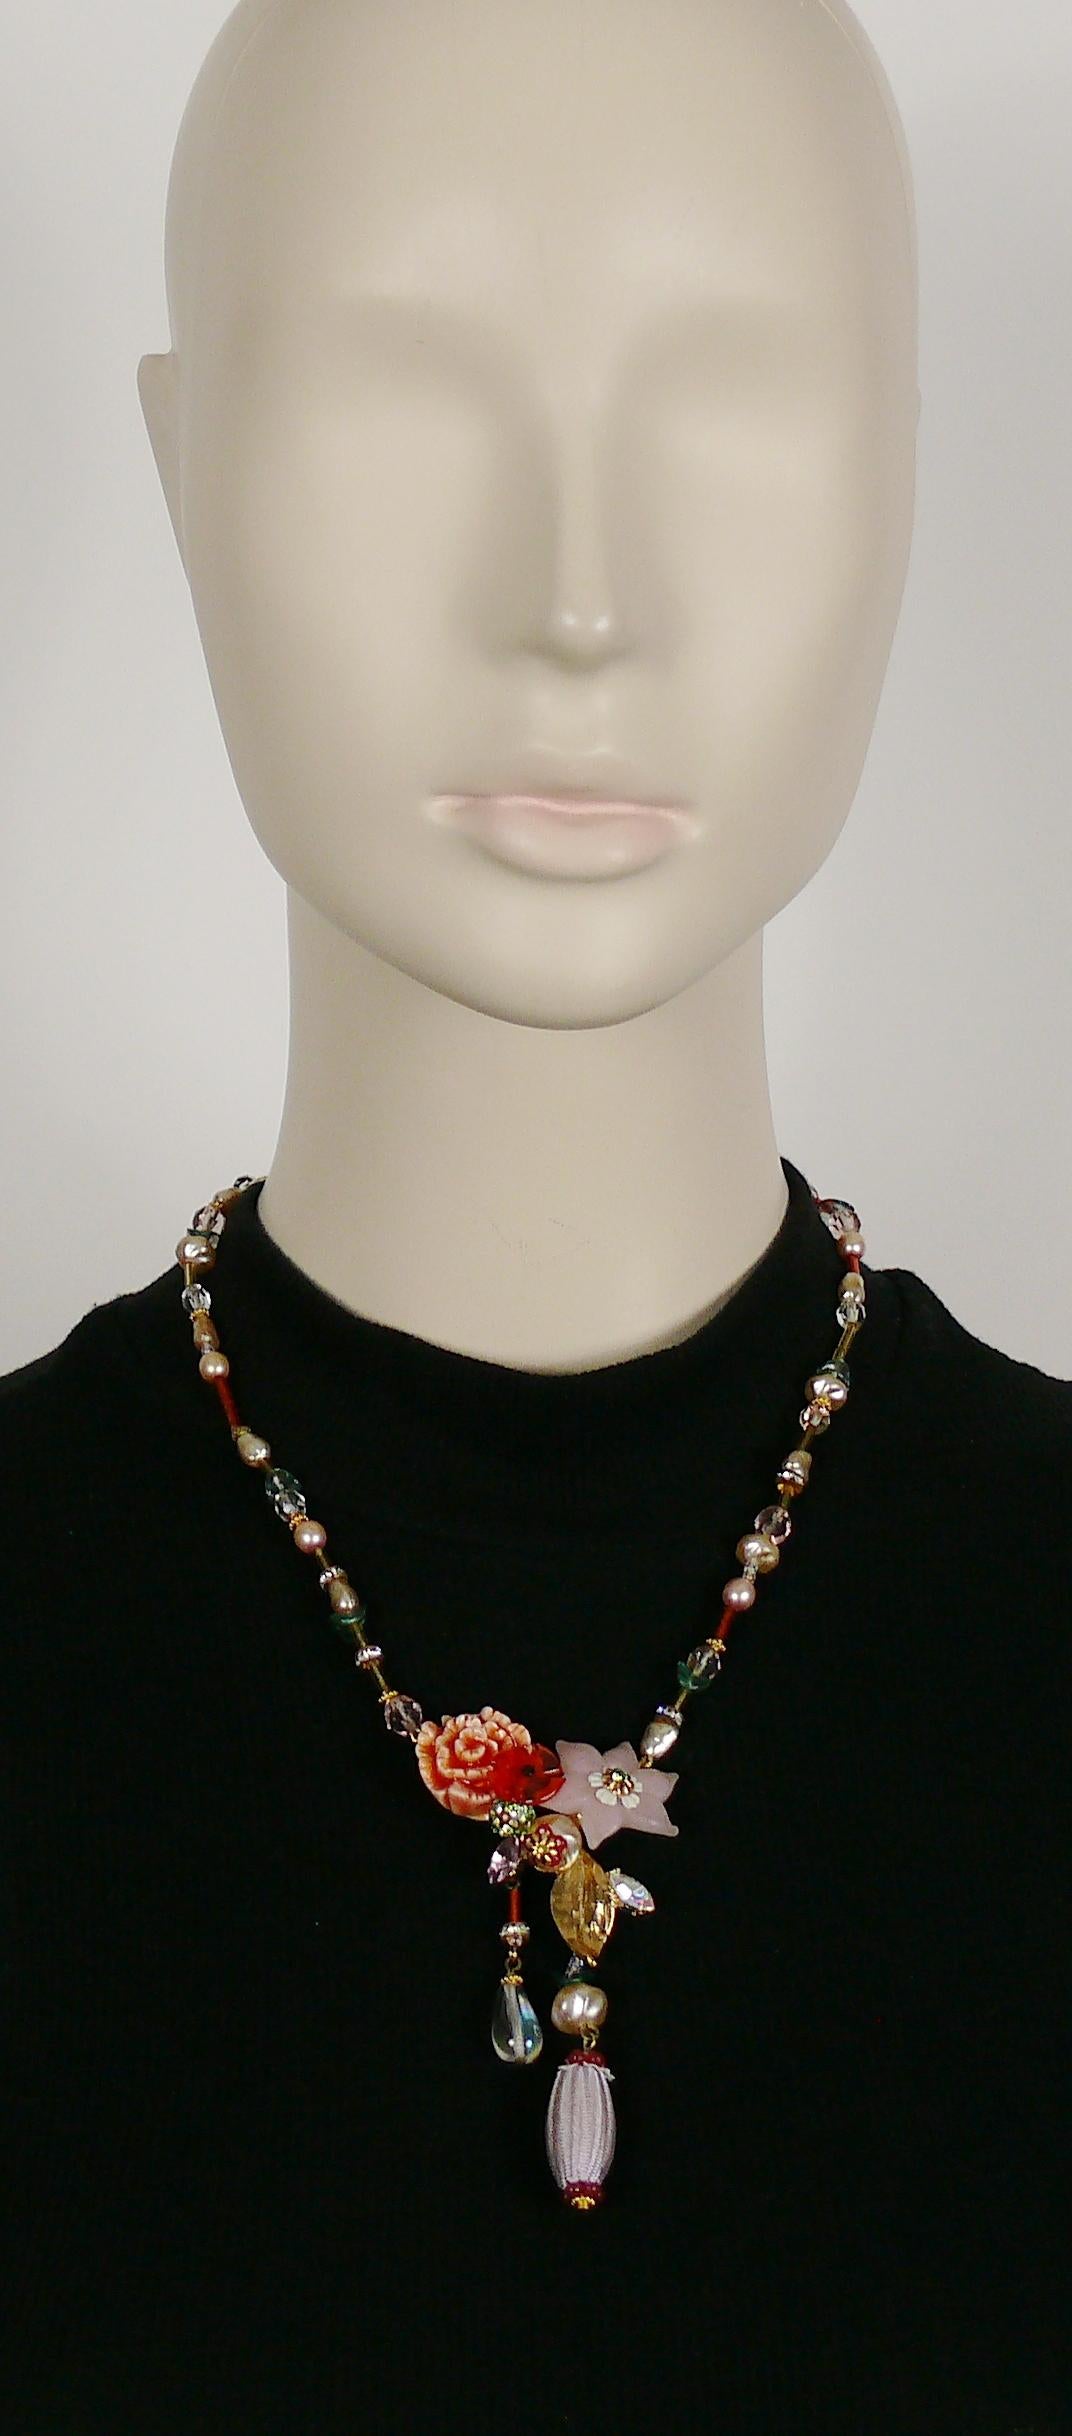 CHRISTIAN LACROIX vintage jewelled necklace featuring flowers made of iridescent pink resin, orange resin and porcelain.

Lobster clasp closure.
Adjustable length.

Marked CHRISTIAN LACROIX CL Made in France.

Indicative measurements : ajustable